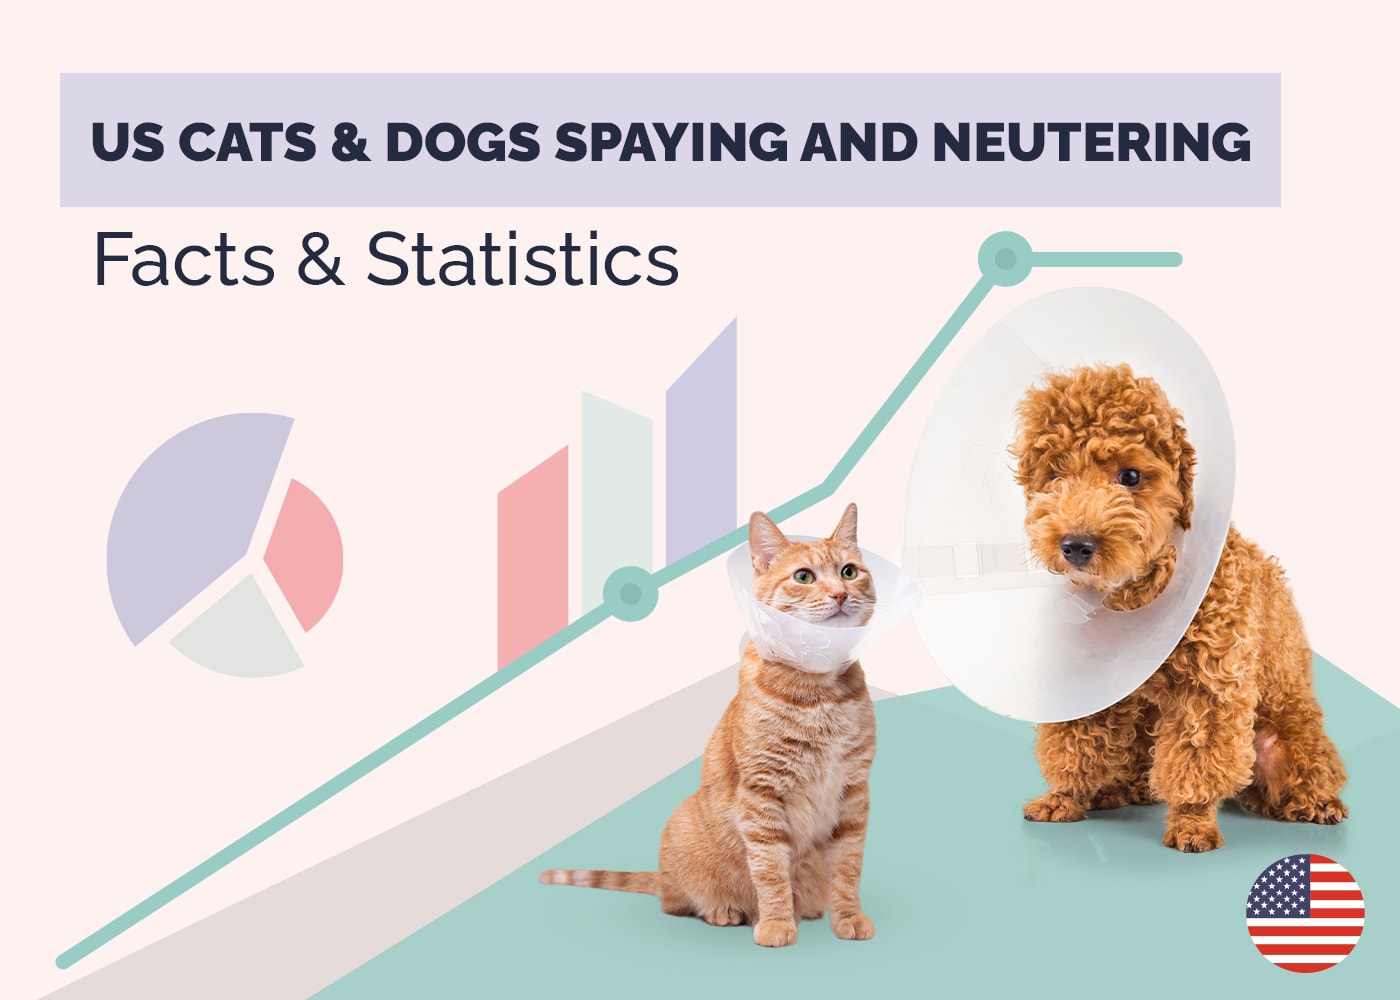 US Cat & Dogs Spaying and Neutering Facts and Statistics